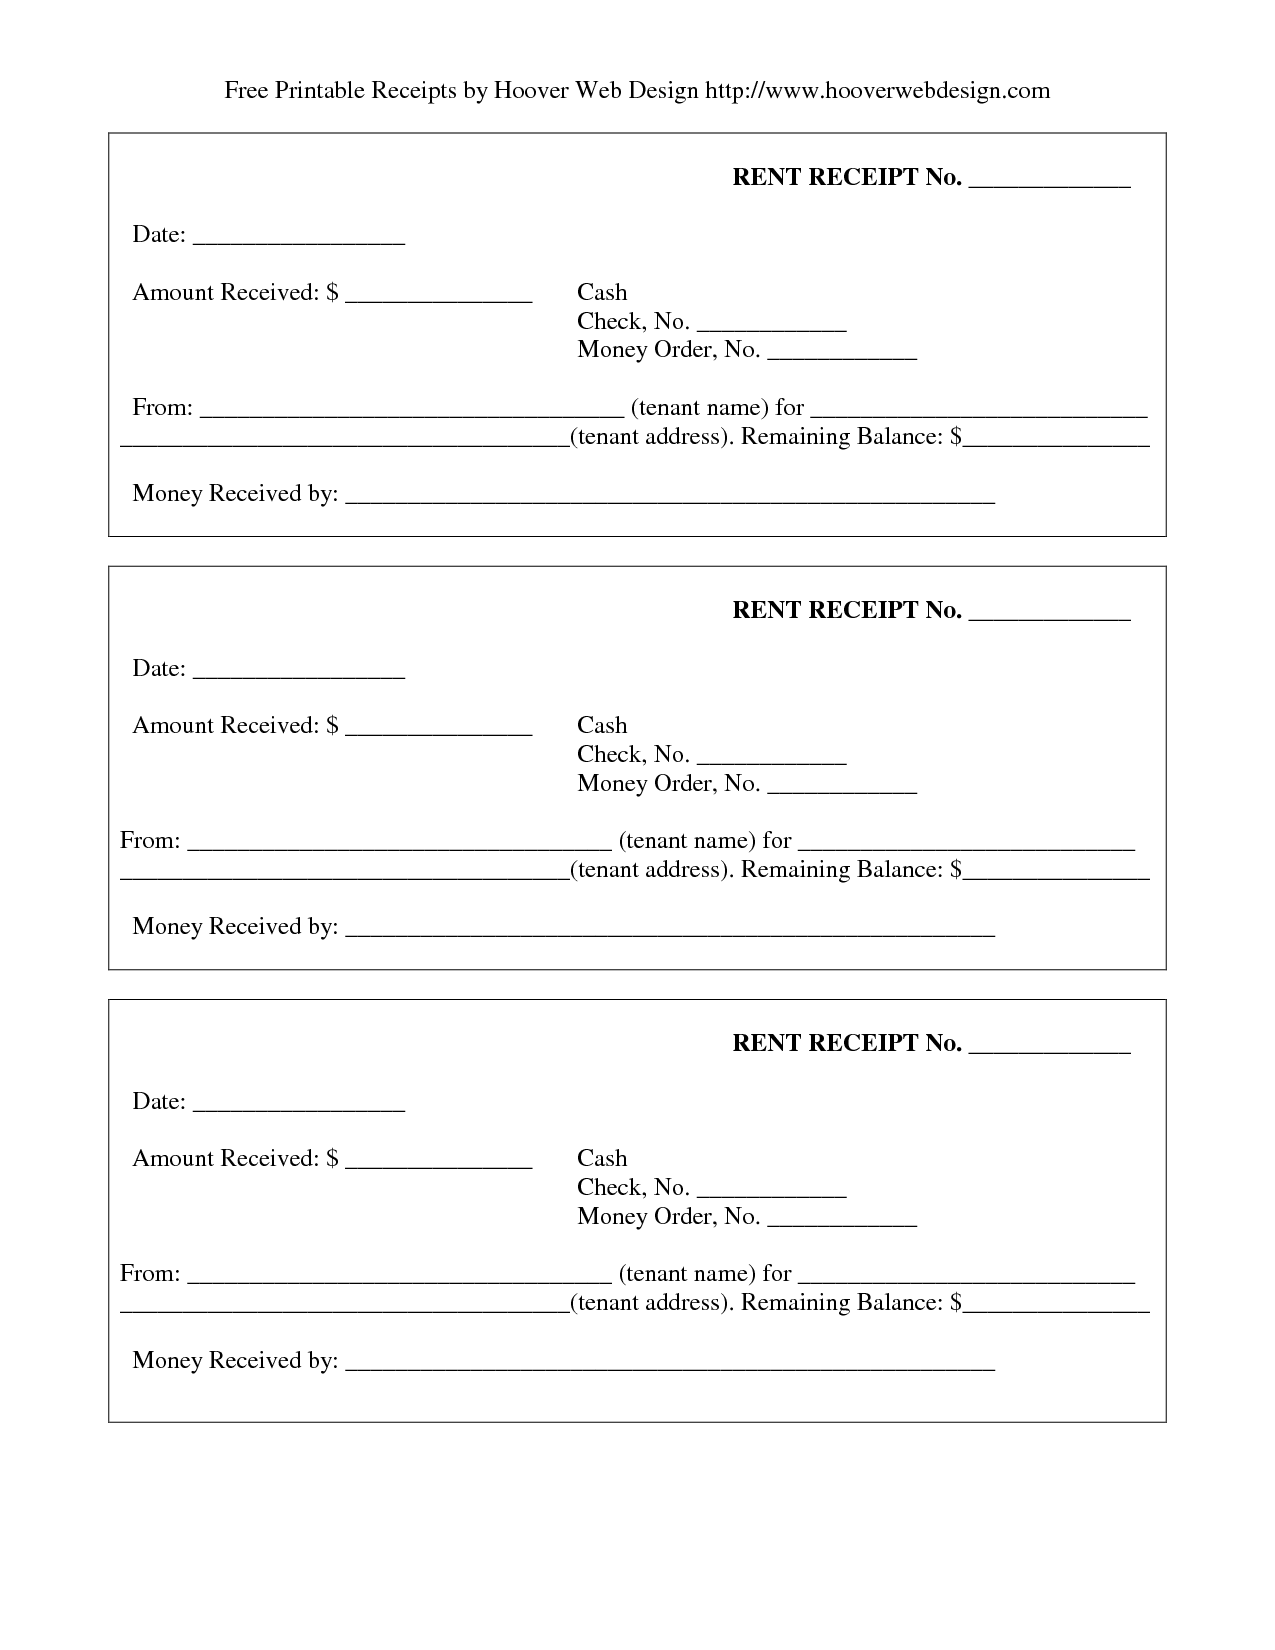 8 Best Images Of Free Printable Receipt Book Blank Rent Receipt 